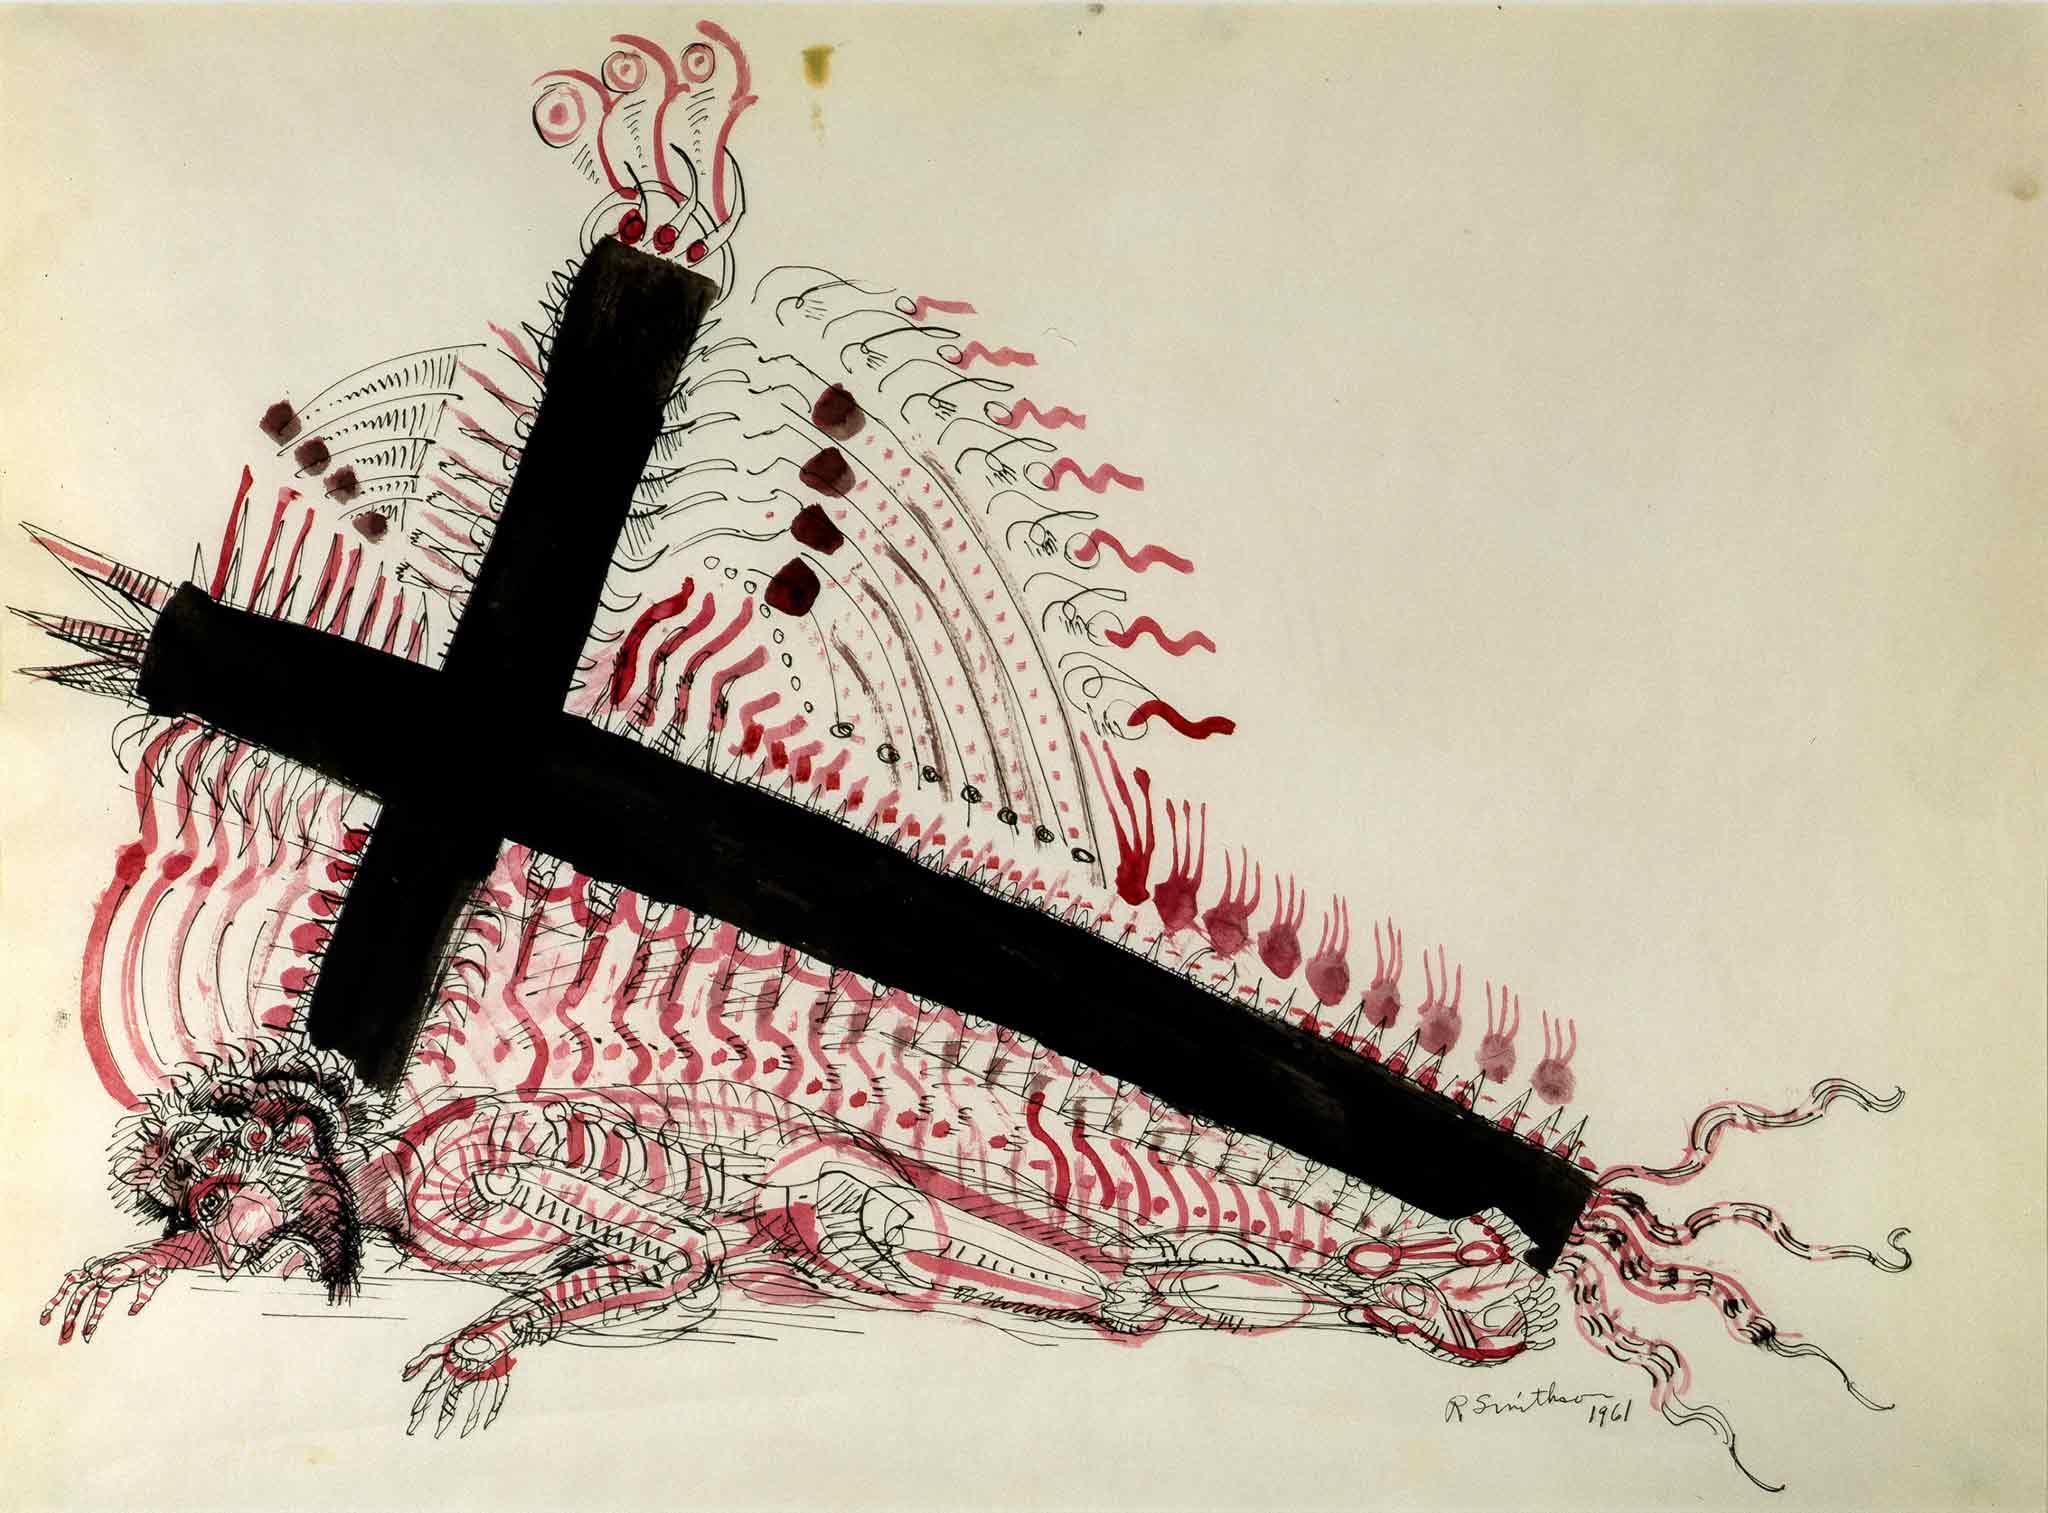 a drawing of a large black cross with geometric patterns emerging from it and Christ trapped under the cross